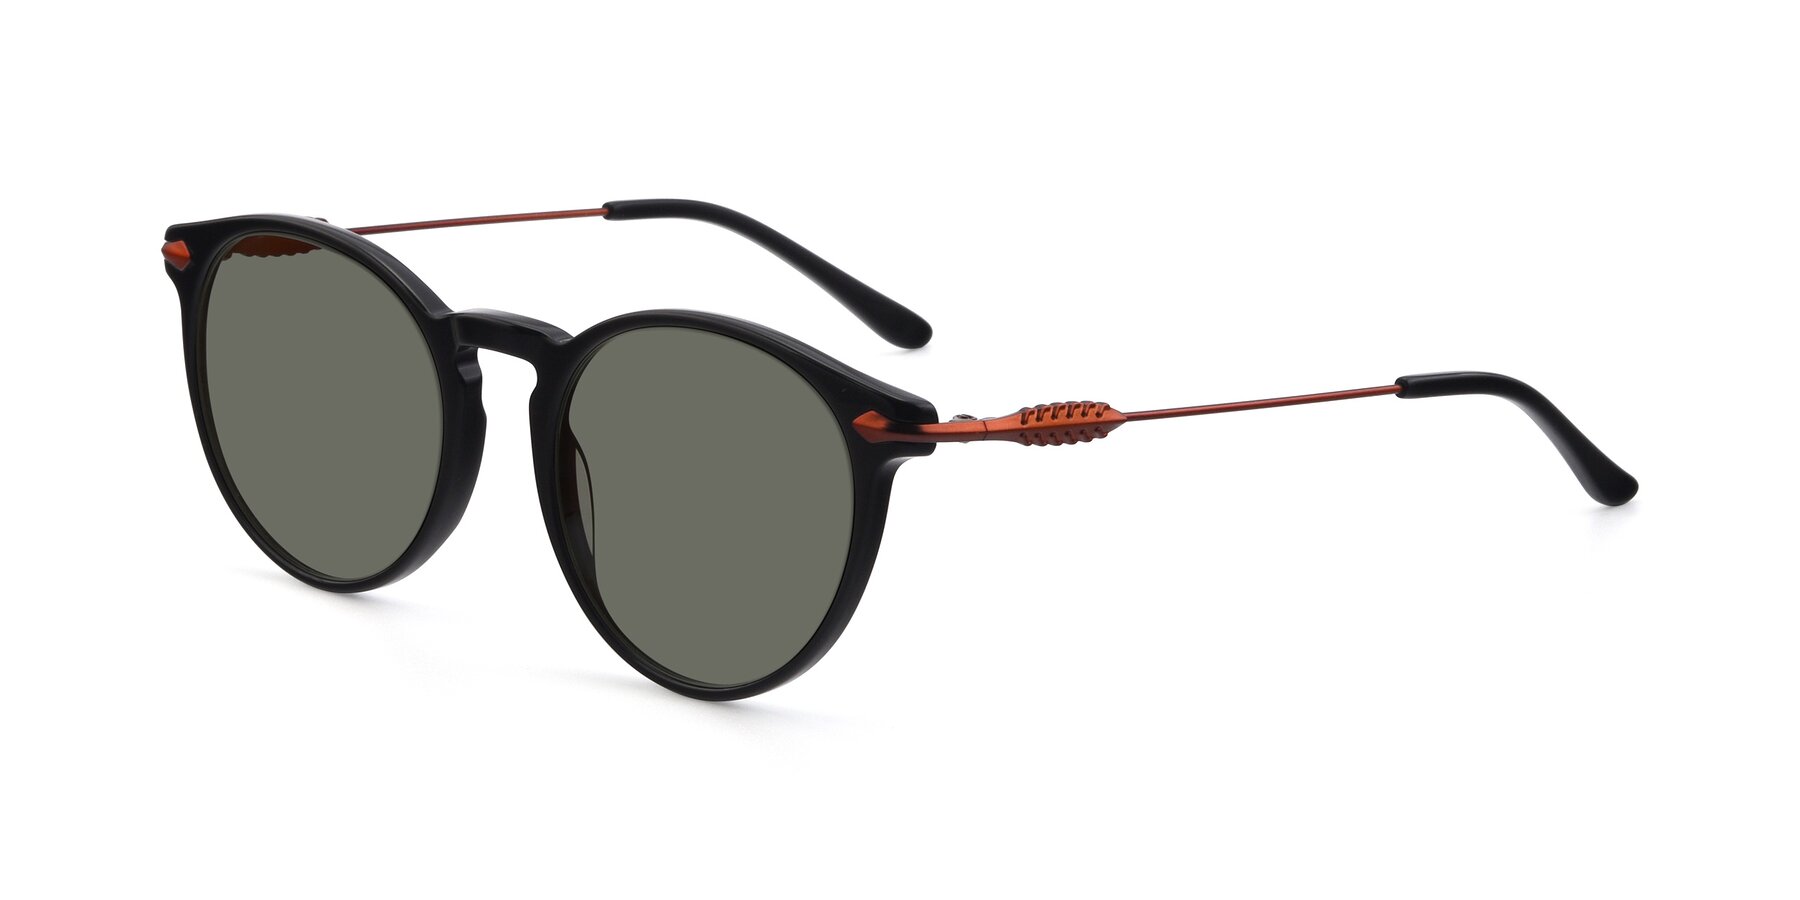 Angle of 17660 in Black with Gray Polarized Lenses